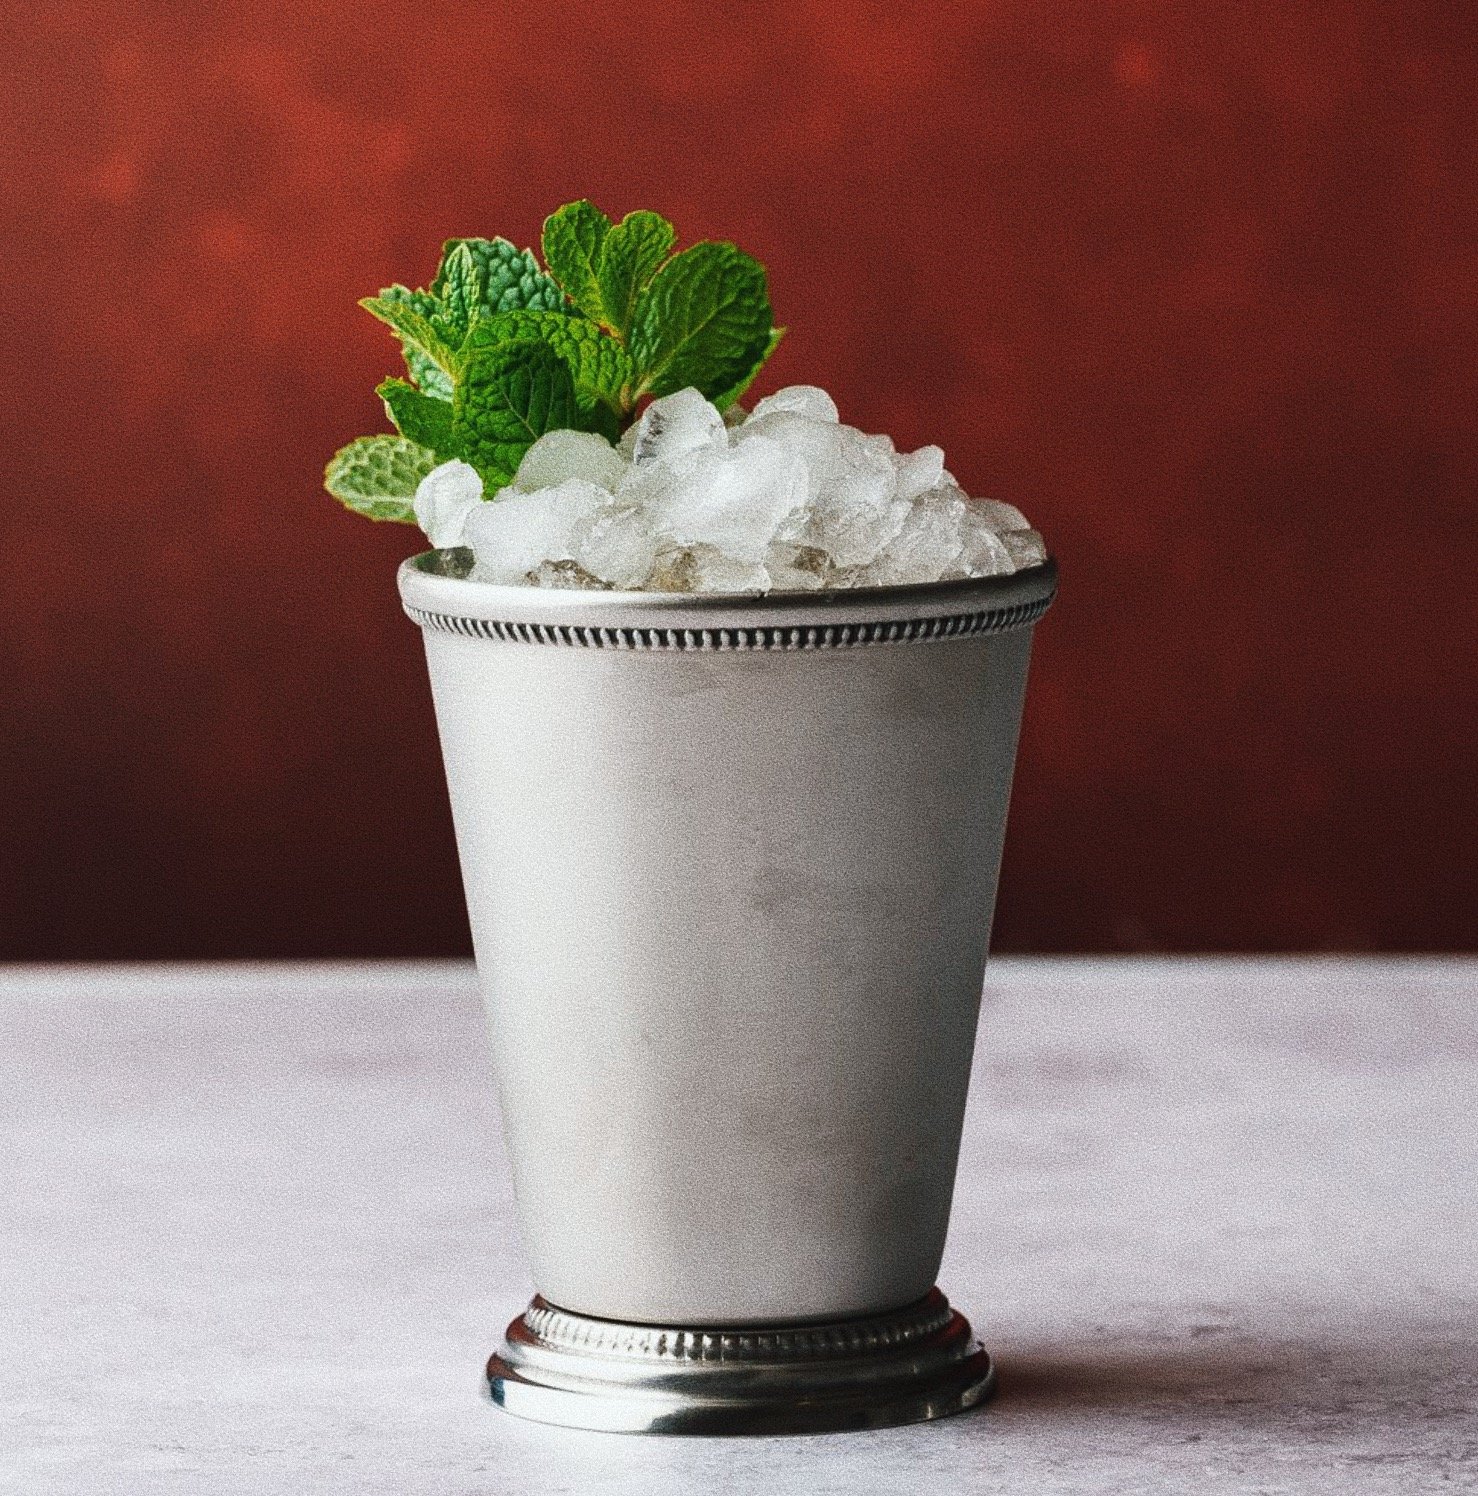 Happy Derby Weekend! Come on by and enjoy a refreshing Mint Julep, you know where to find us 🐎🏆

#goboeufyourself #derbyday #mintjuleps #humboldtpark #westtown